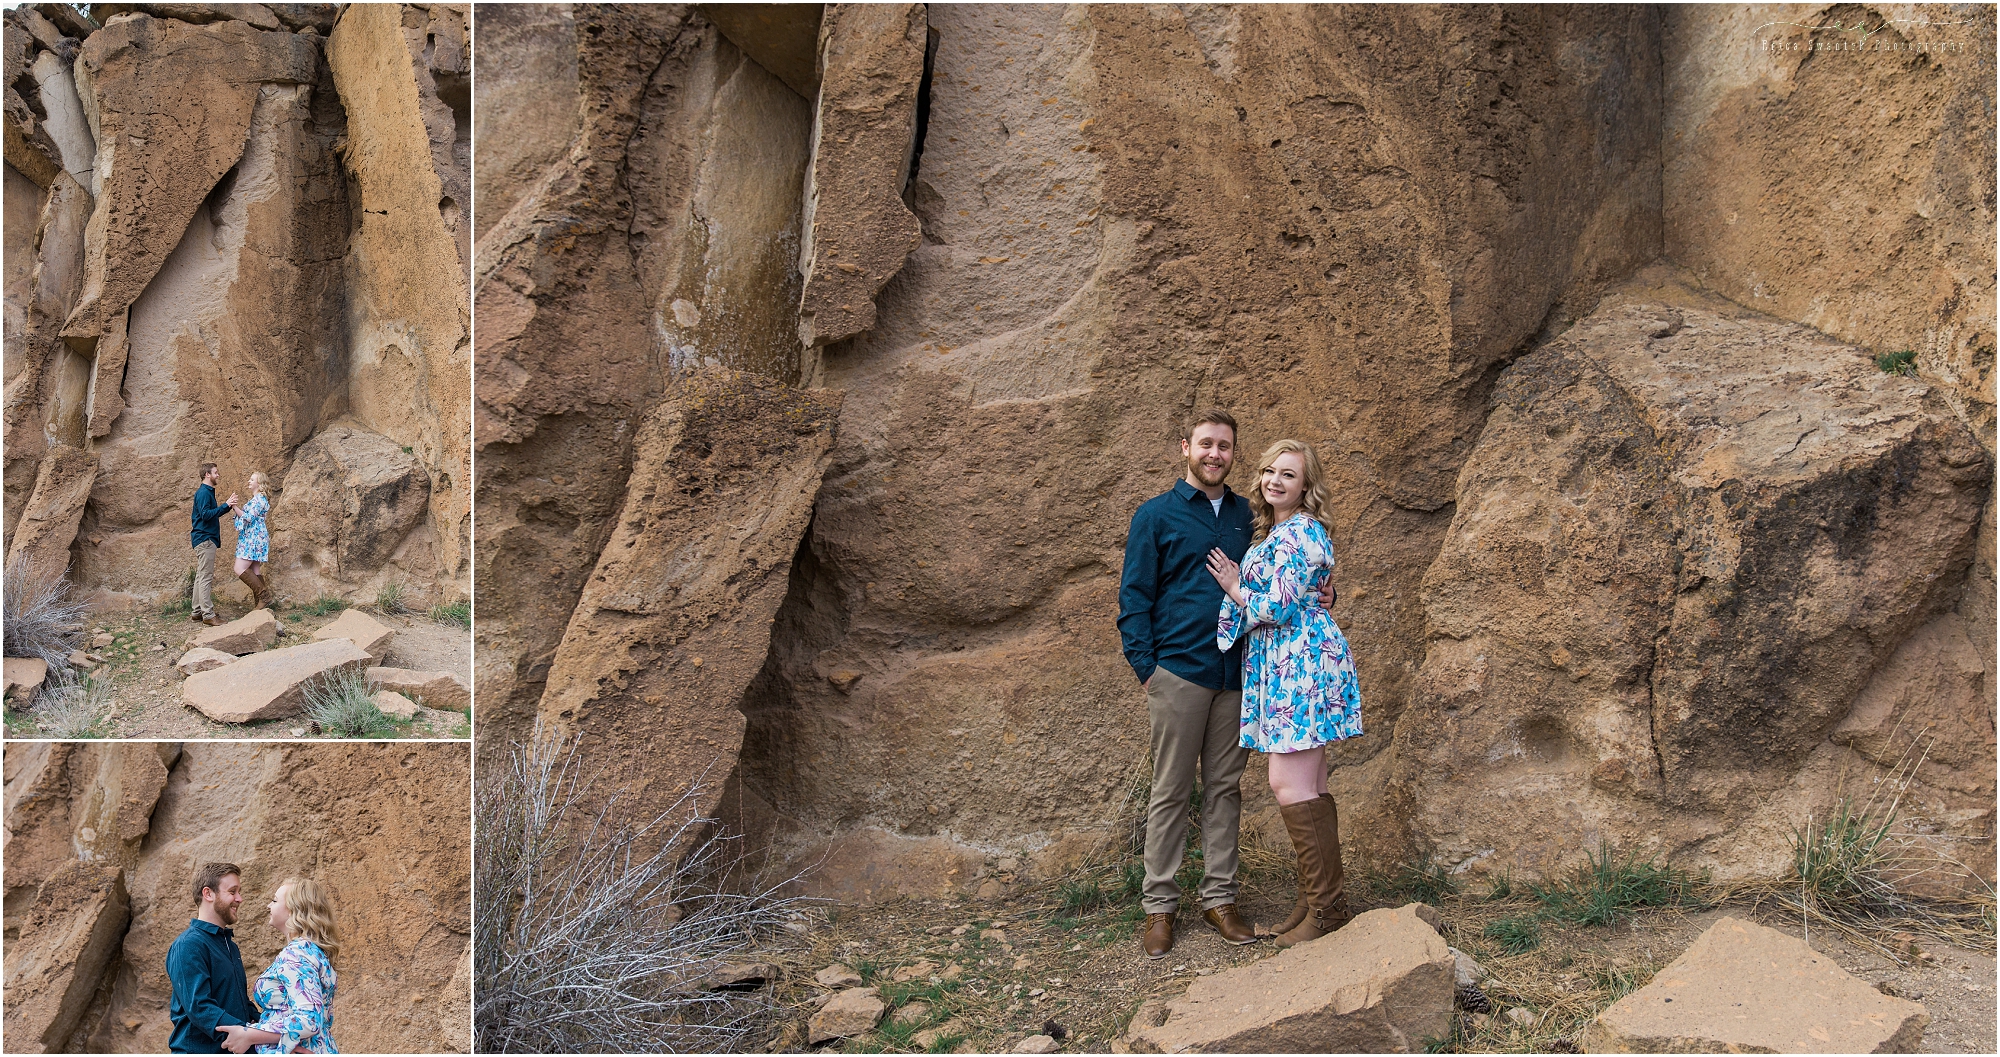 A gorgeous engagement photo session along the Deschutes River by Bend, OR wedding photographer Erica Swantek Photography.